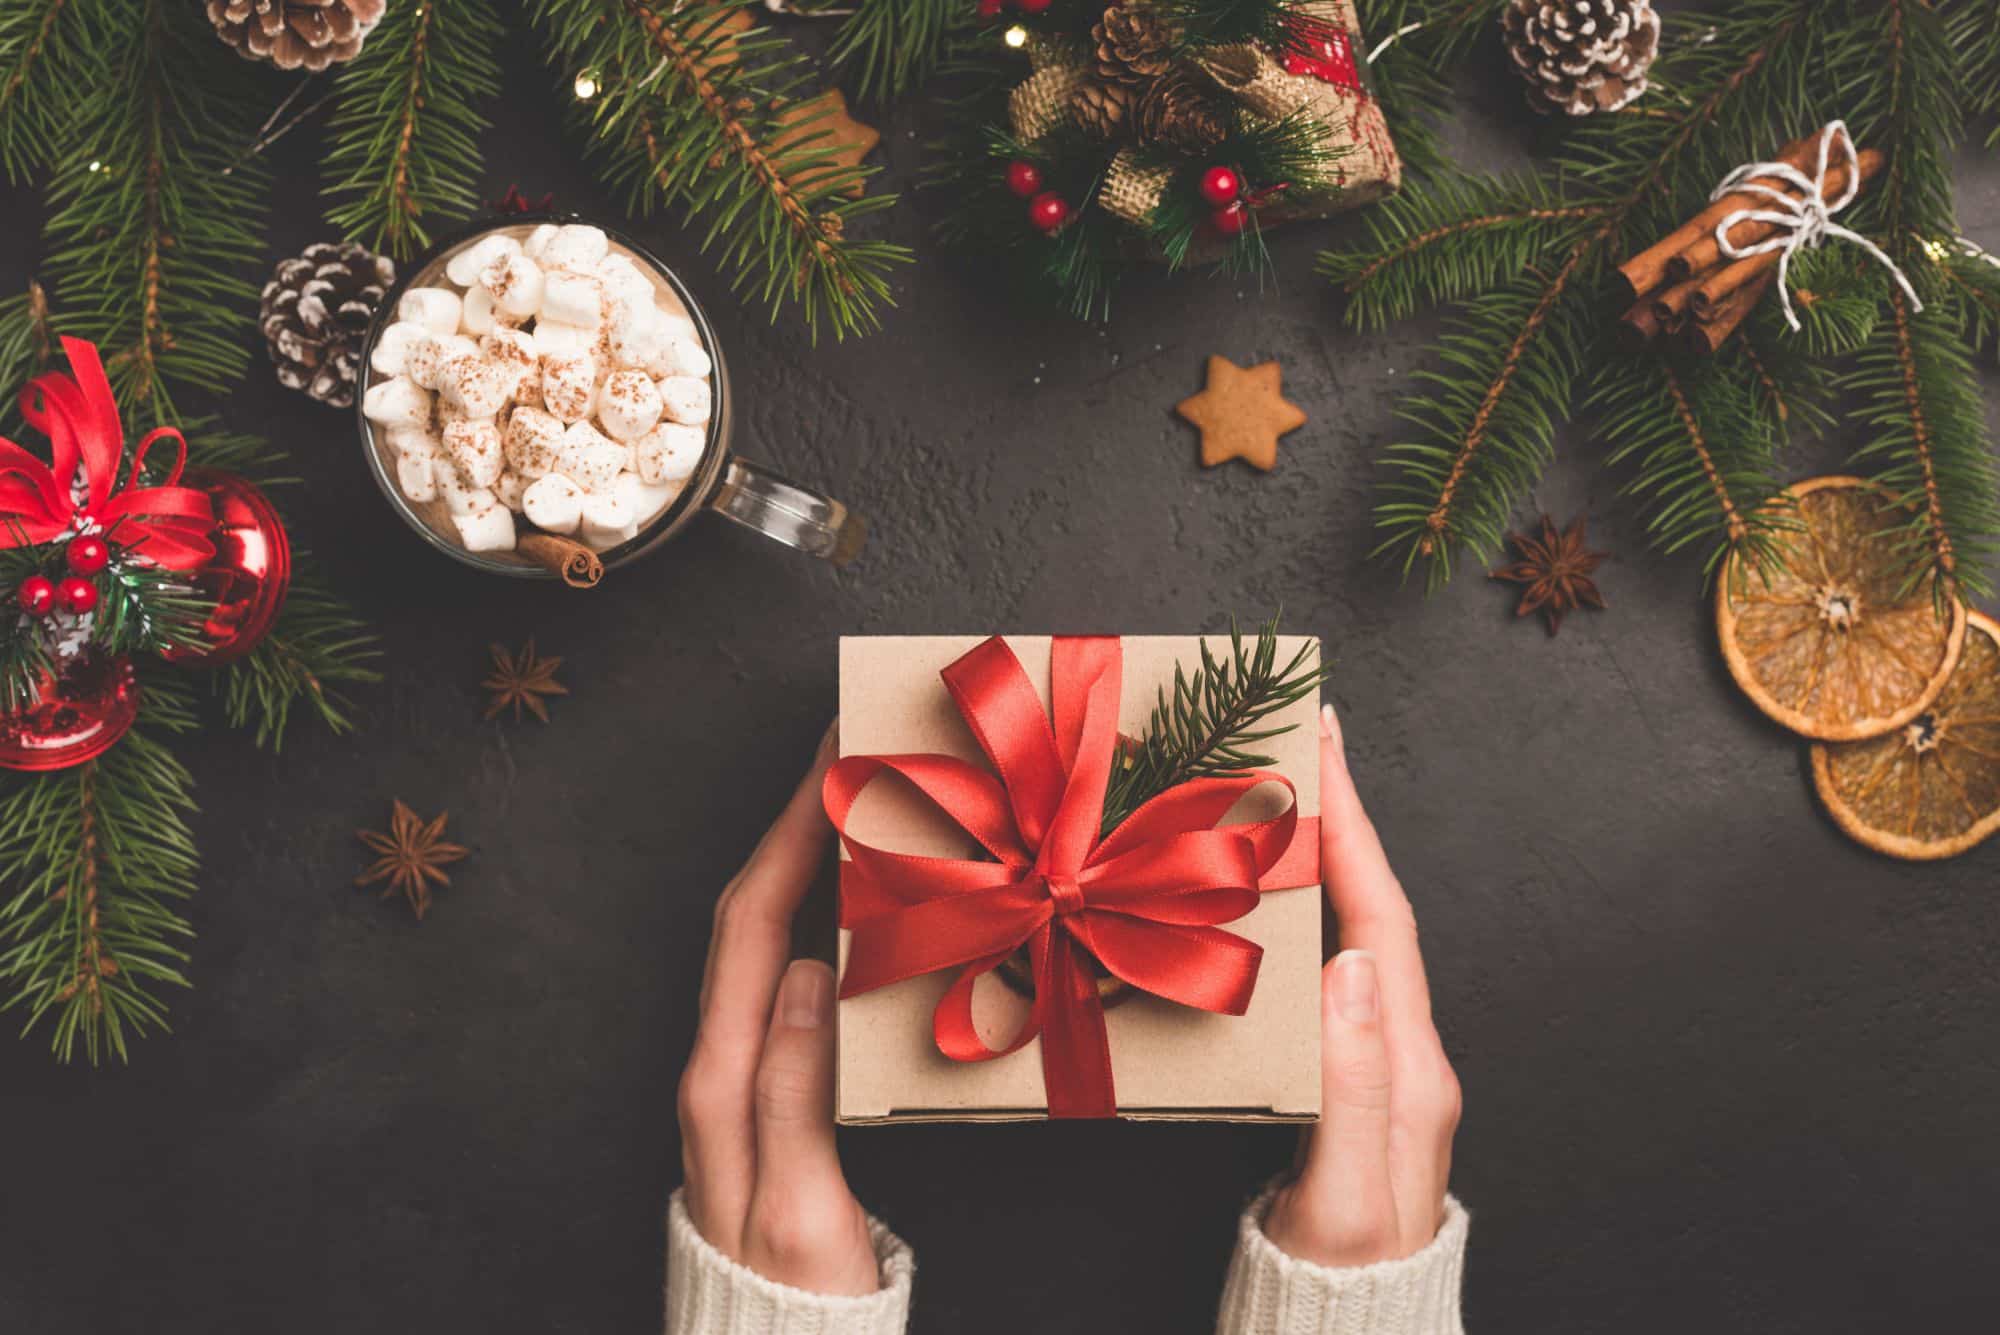 5 Unique Gift Ideas for Christmas in Your Budget